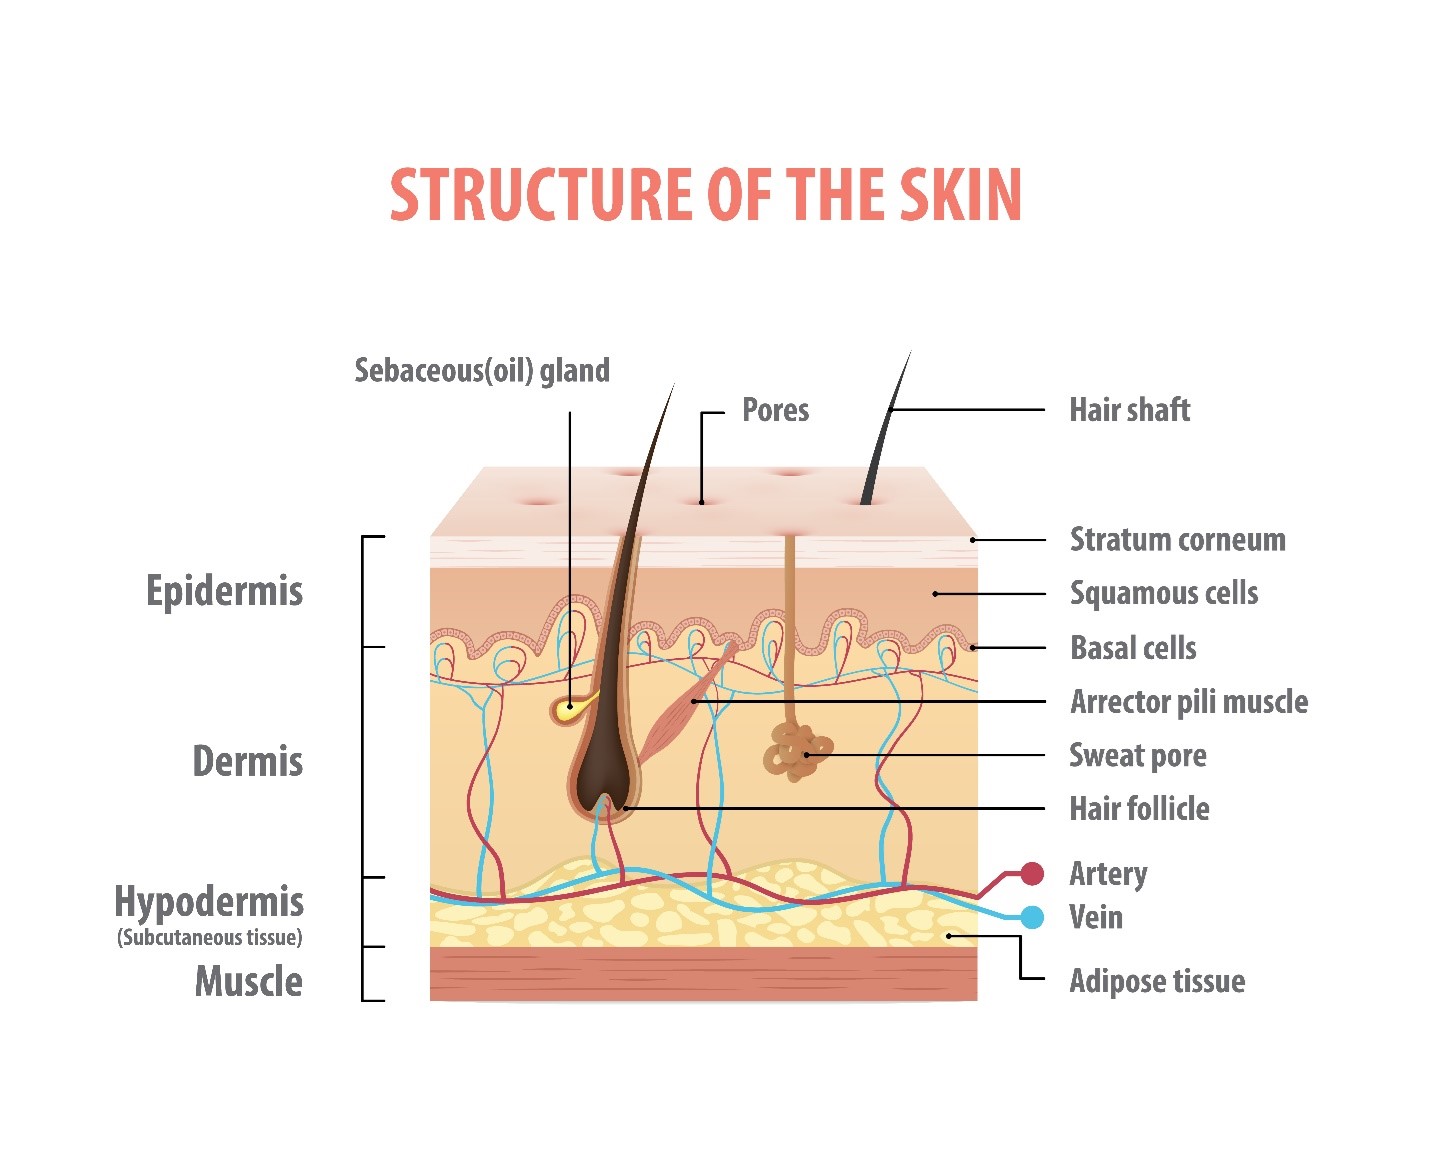 The anatomical construction of skin is as in this graphic.